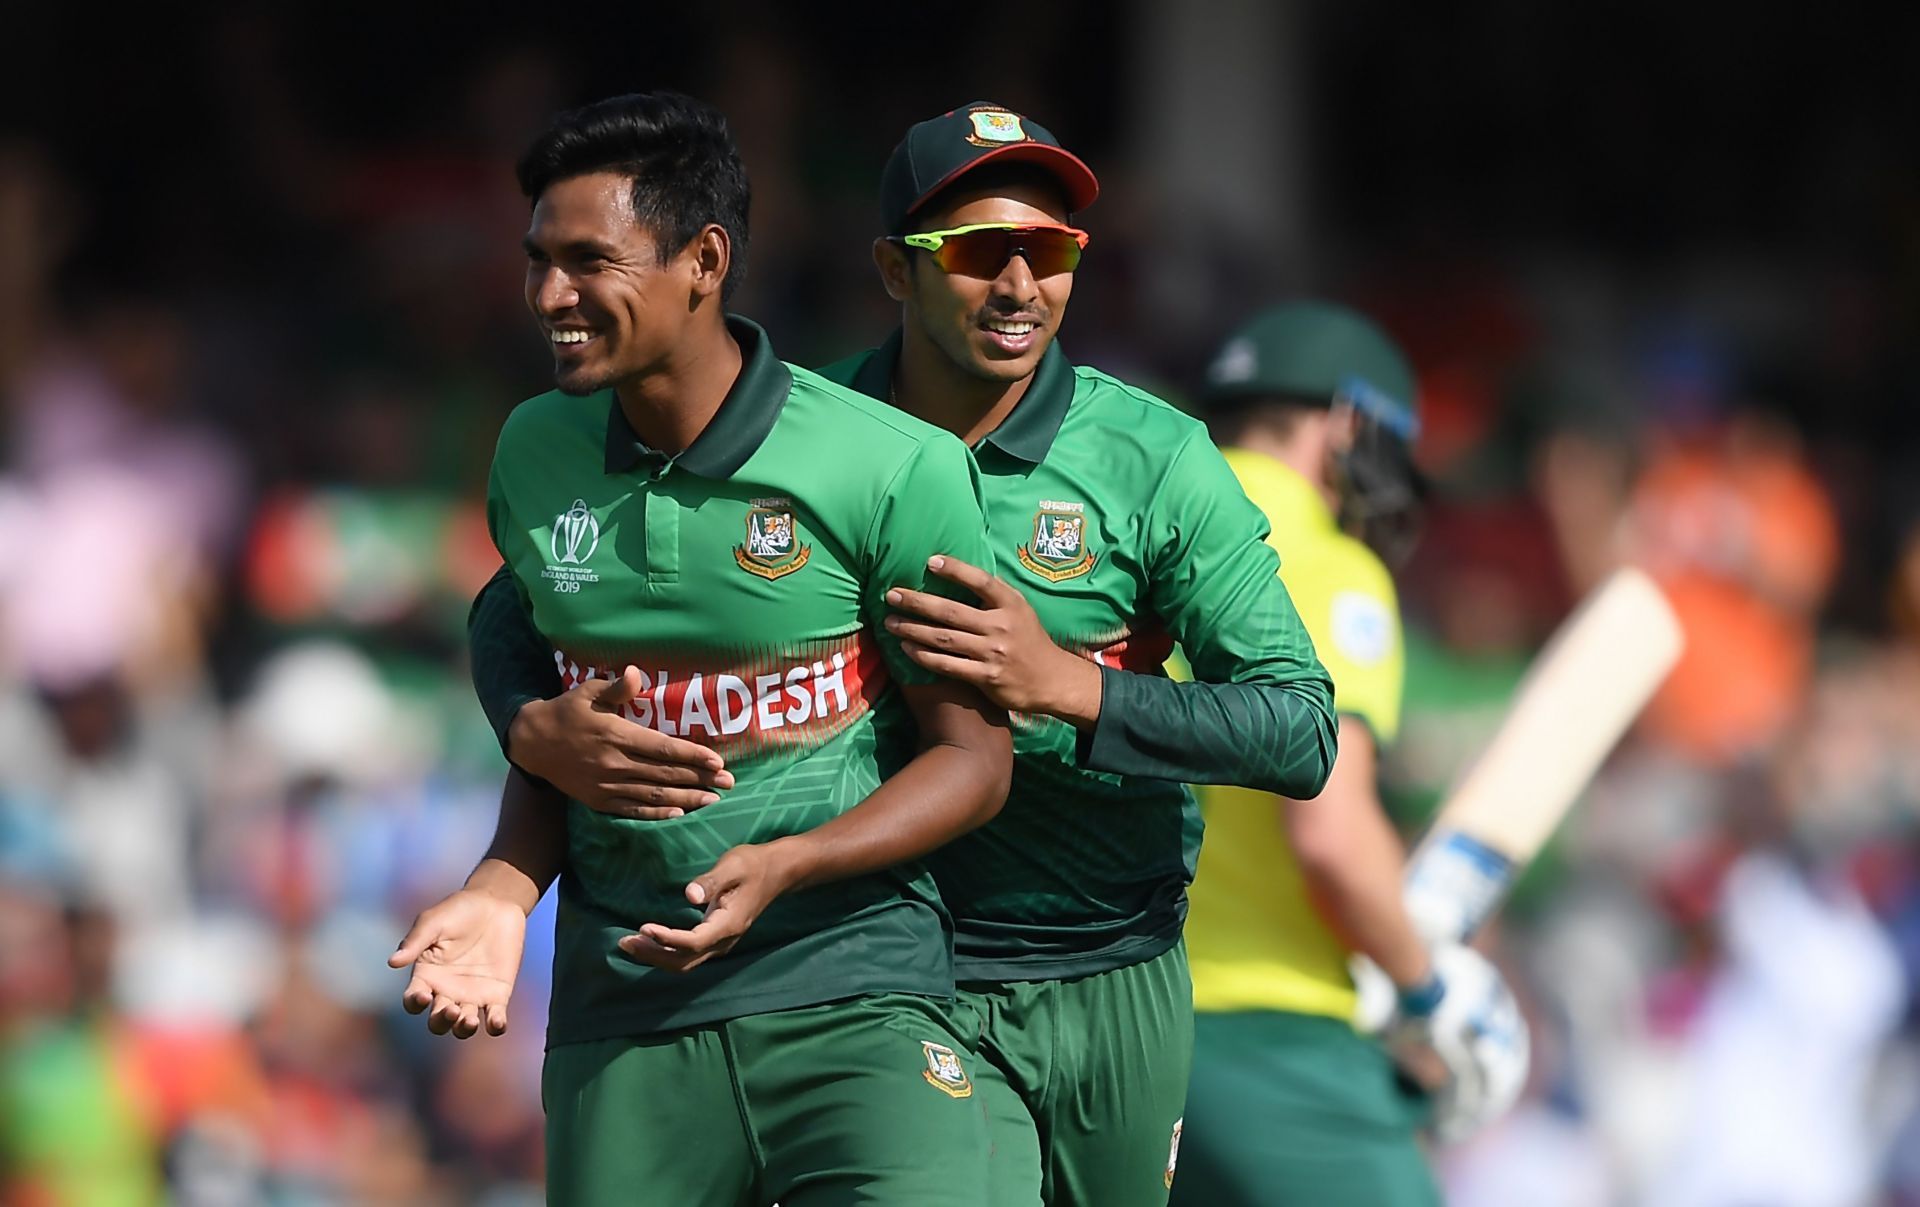 Mustafizur Rahman will be the player to watch out for in the South Africa vs Bangladesh T20 World Cup 2021 match